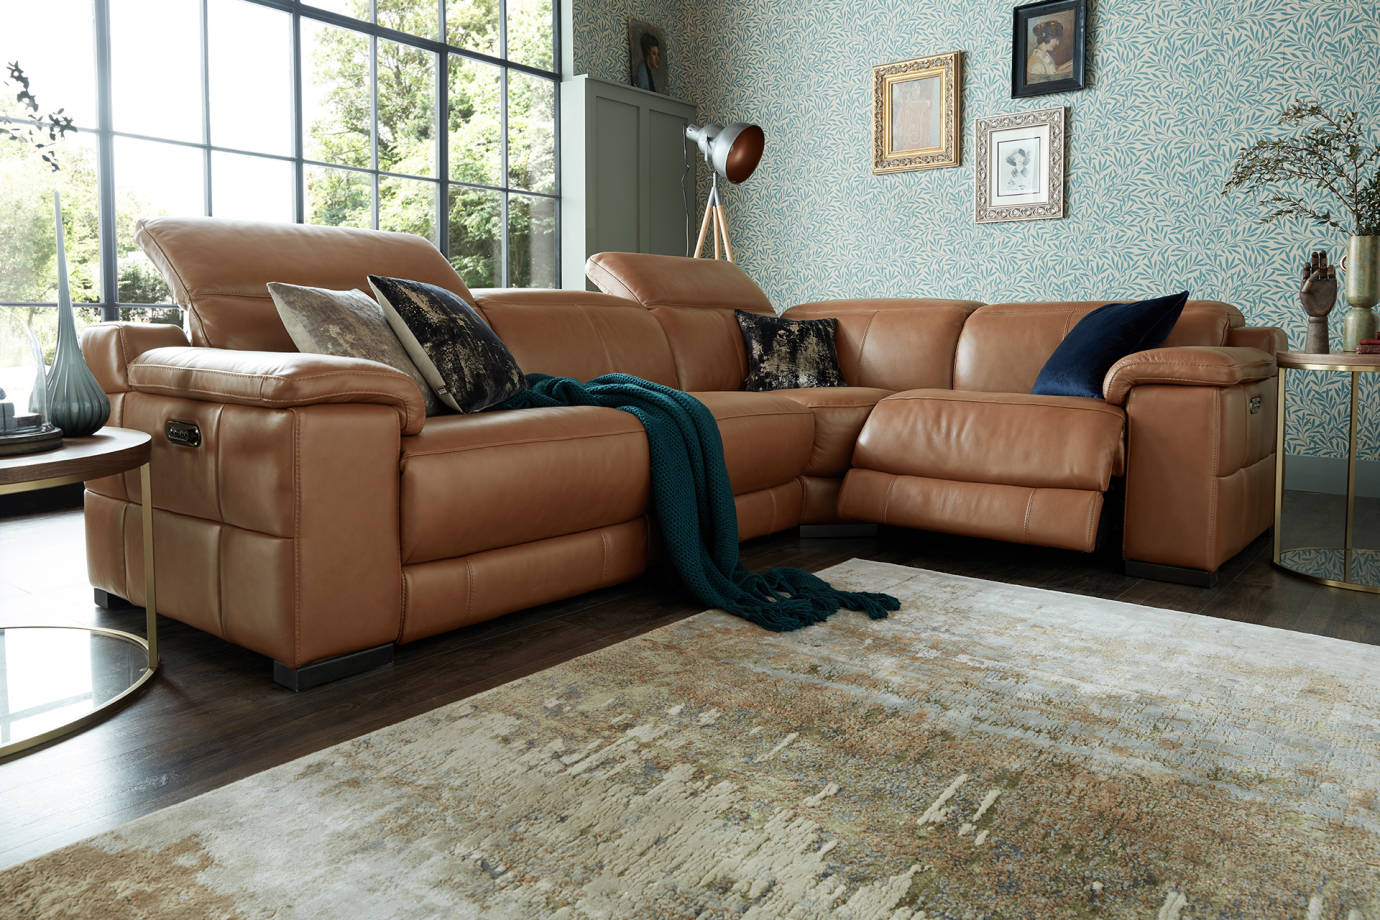 Recliner Sofas Leather Fabric And, Brown Leather Sofa Recliner